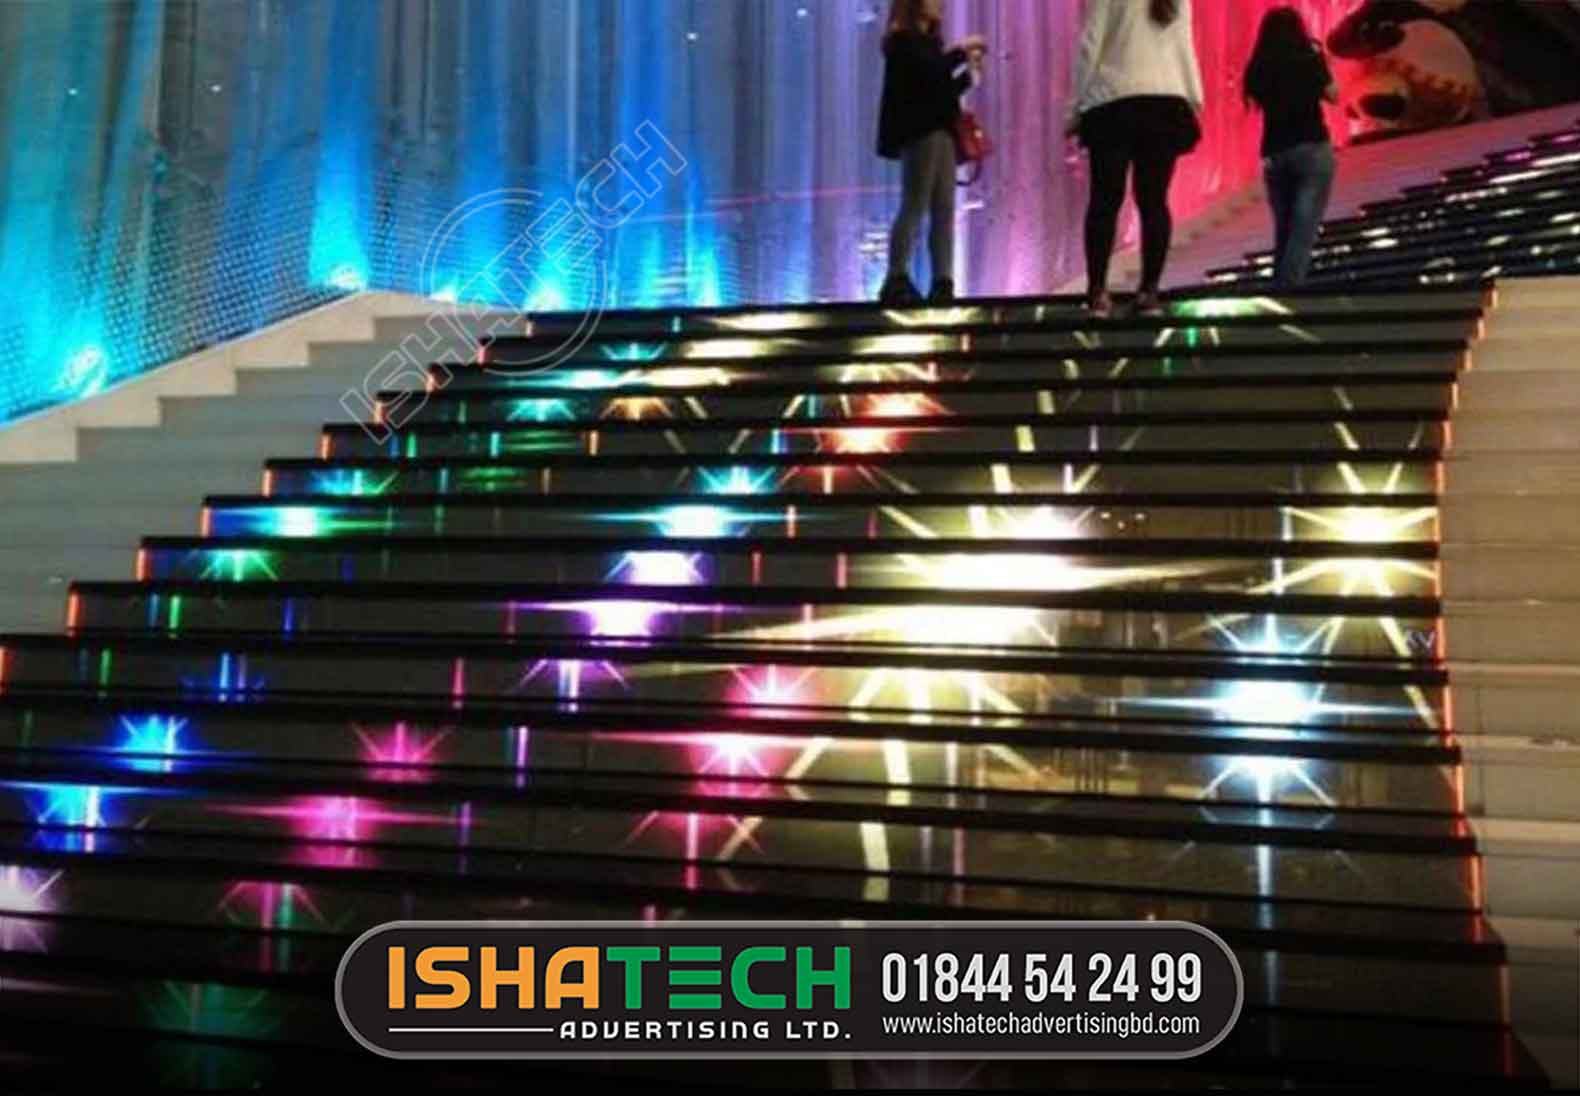 LED Display white paper for architects & designers | shopping mall stair video advertising bd, best led signboard and billboard maker and manufacturer agency in Dhaka Bangladesh